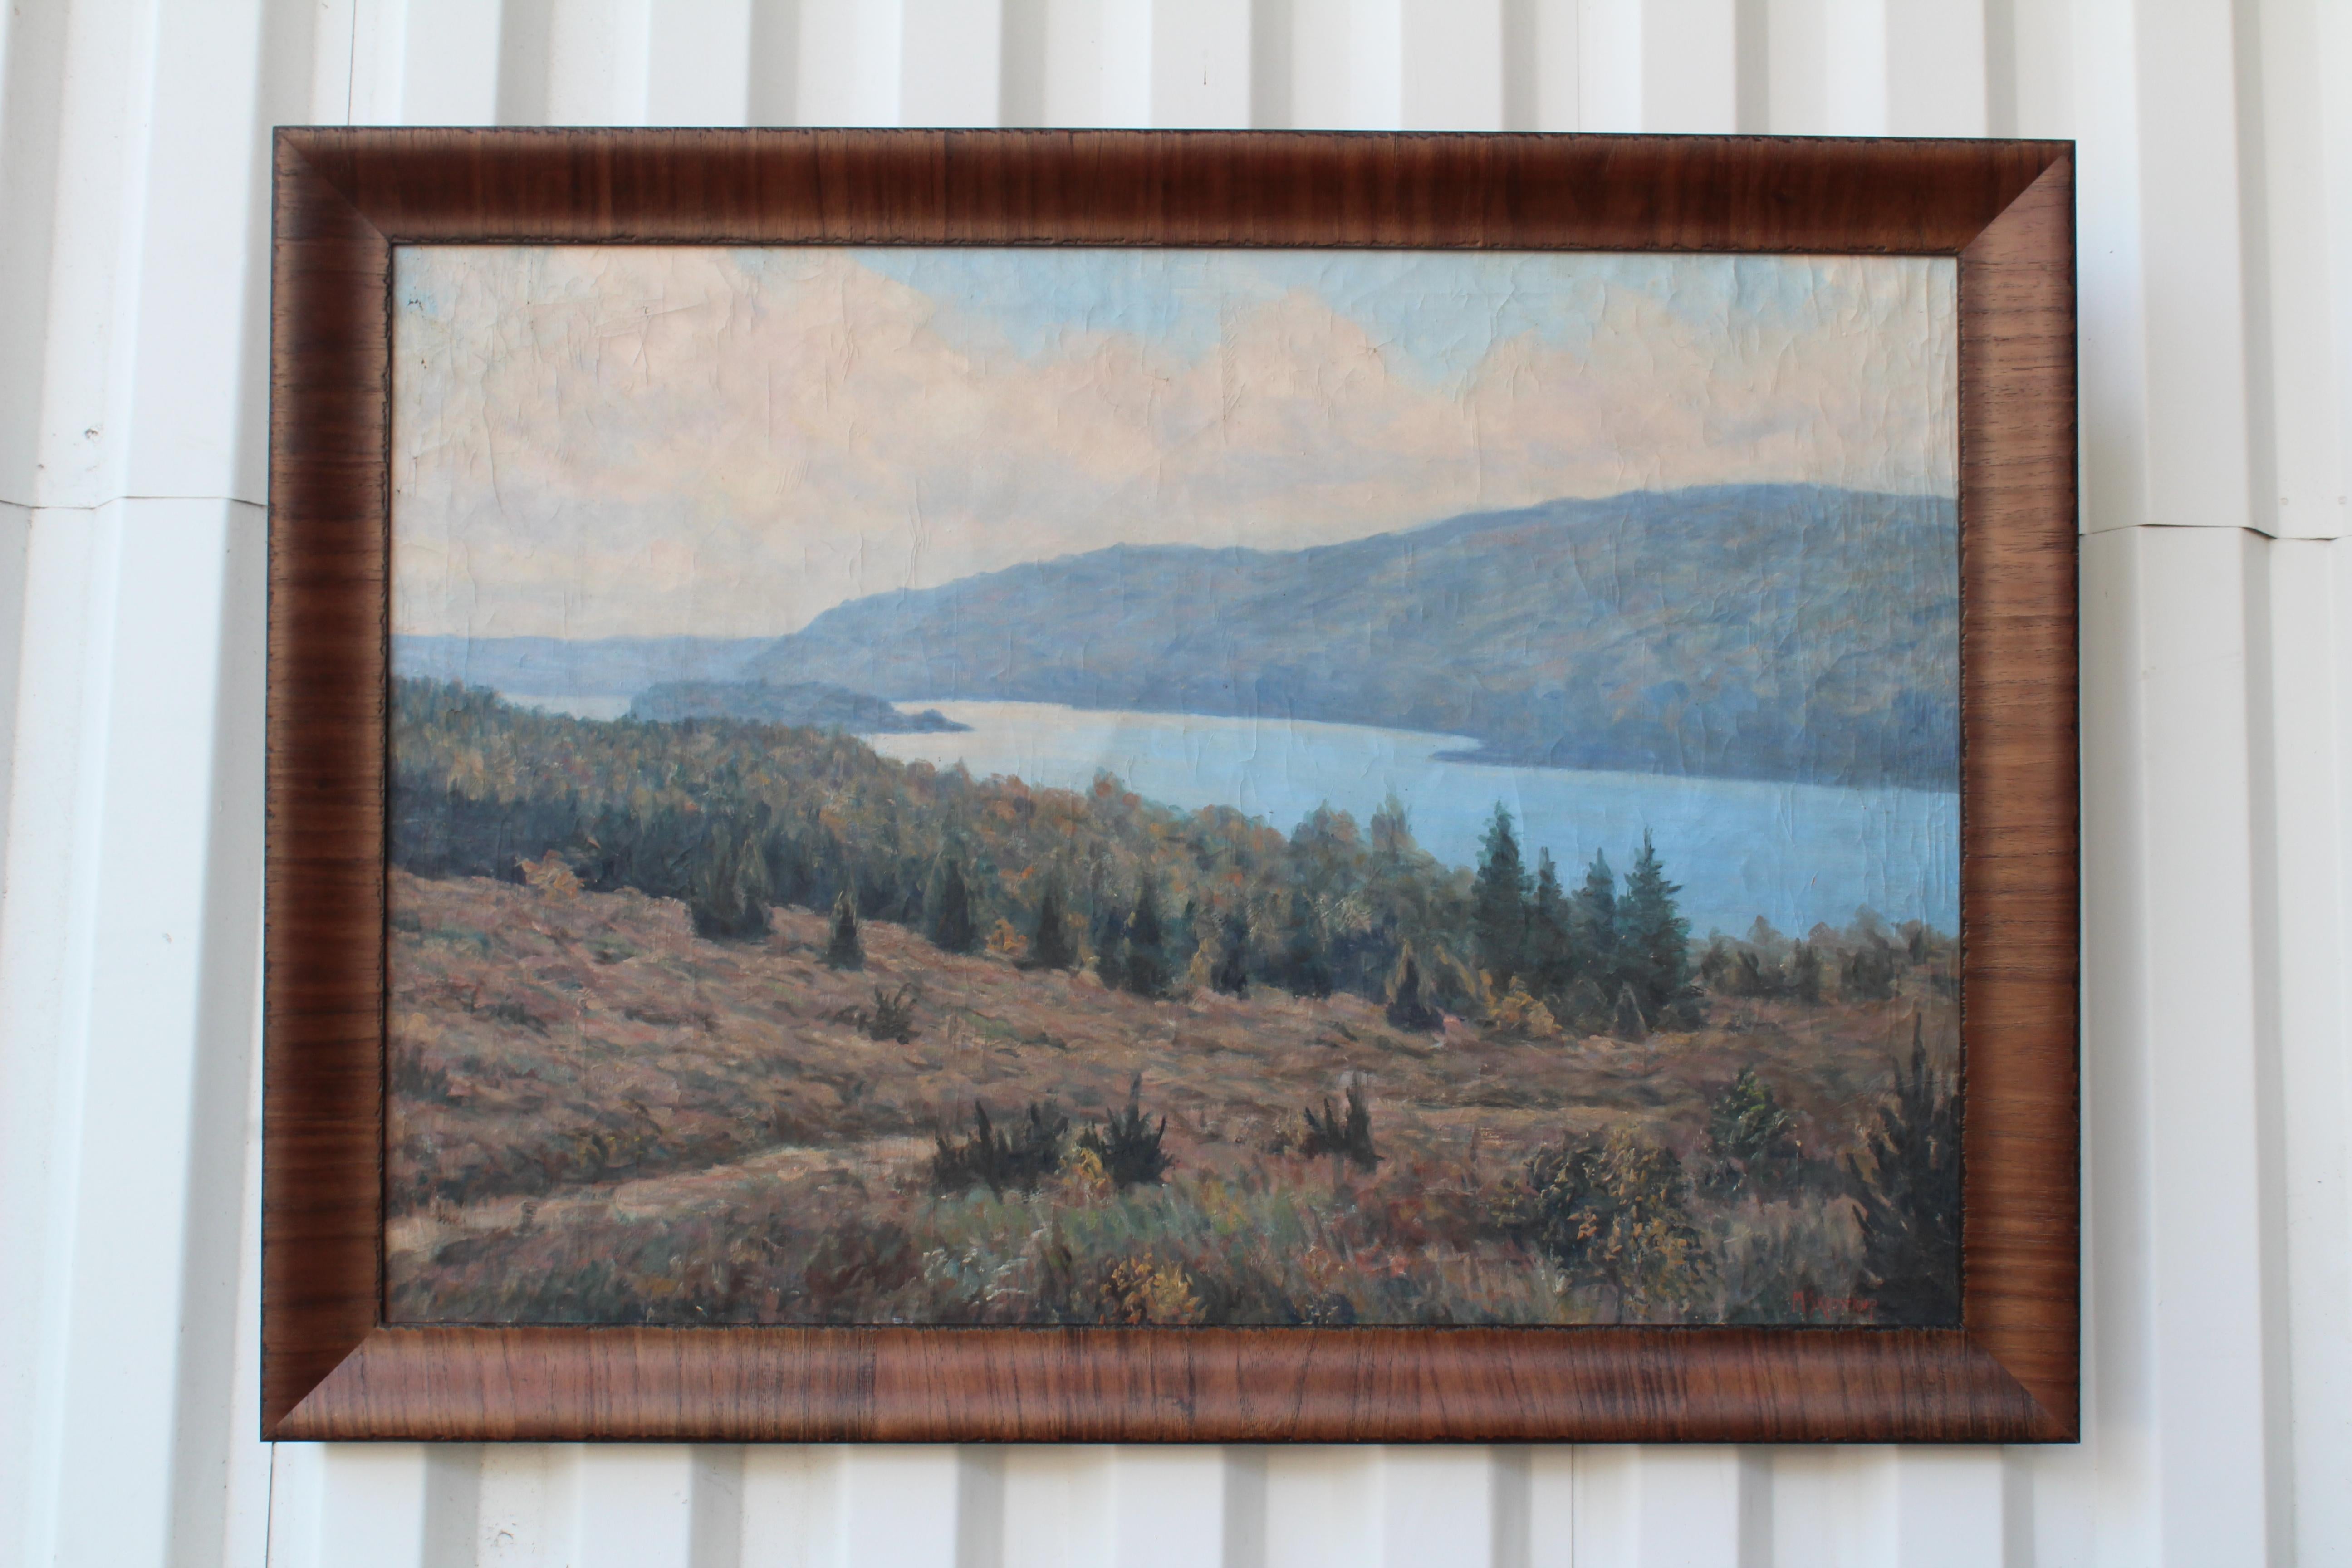 Serene mountain lake scene oil on canvas painting by Canadian artist George Skodstrup. Painted sometime in the 1950s. This painting has been professionally reframed in a beautiful walnut frame with an antique edge detail. Overall this painting is in